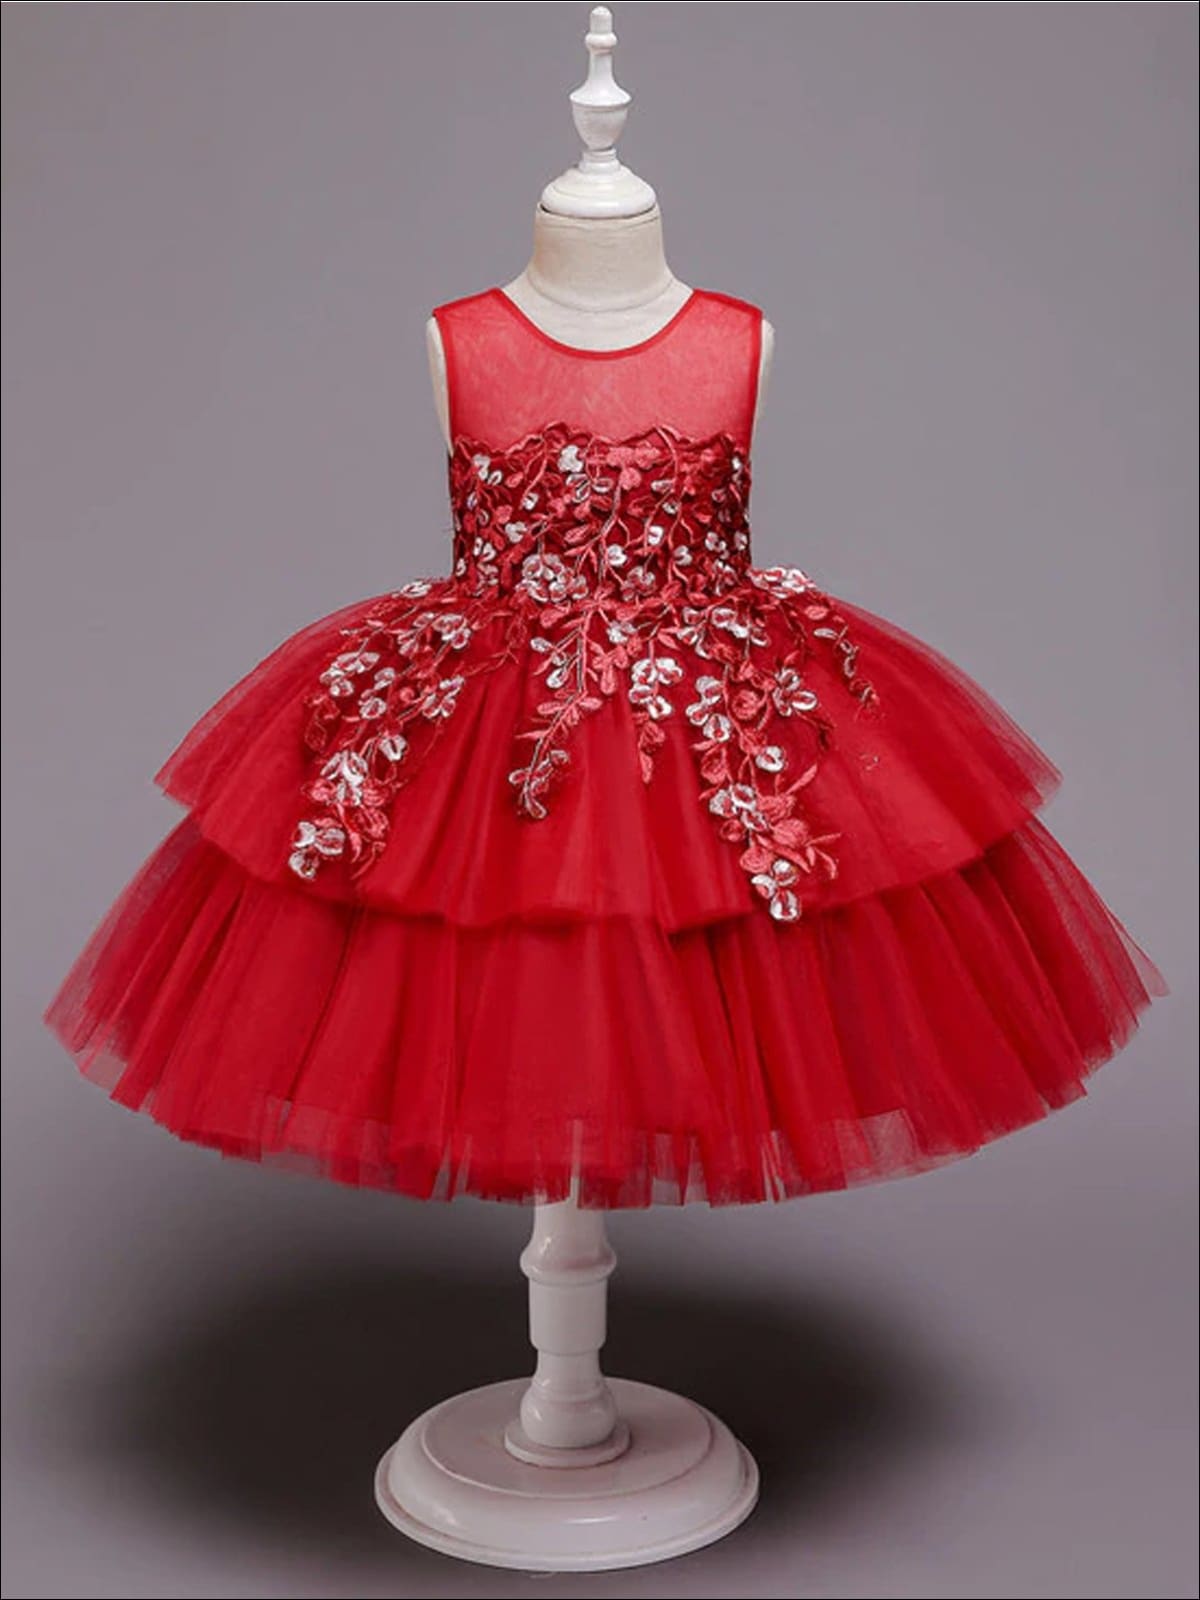 Girls Red Floral Embroidered Tiered Holiday Dressy Dress - Red / 3T/4T - Girls Fall Dressy Dress